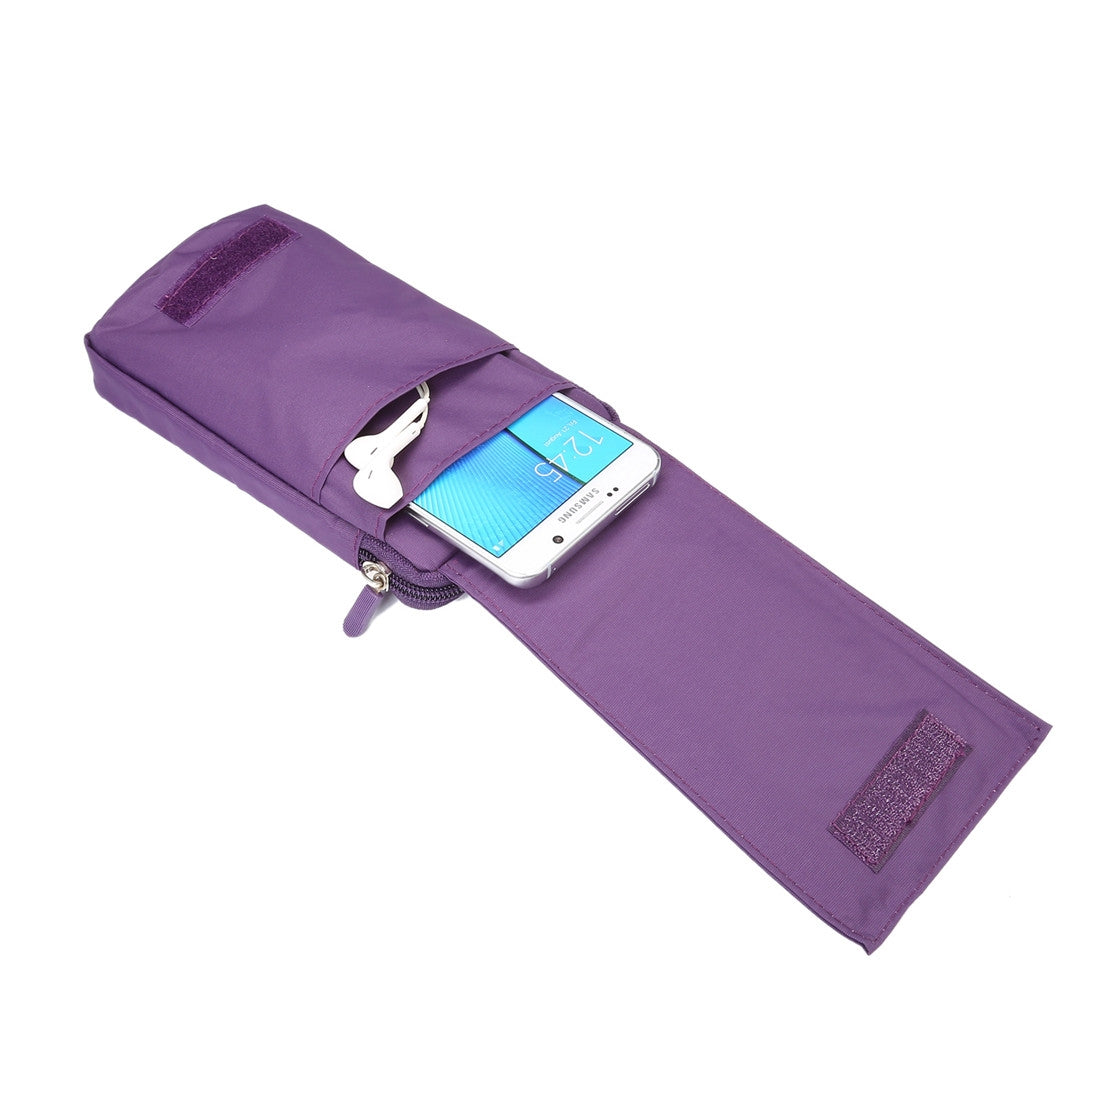 6.4 inch Multifunctional Square Pattern Canvas Sports Storage Waist Packs / Phone Cases / Hiking Bag / Camping Bag with Hanging Hook for iPhone 6S Plus / 7 Plus / Galaxy S7 Edge / Galaxy Note 8(Purple)